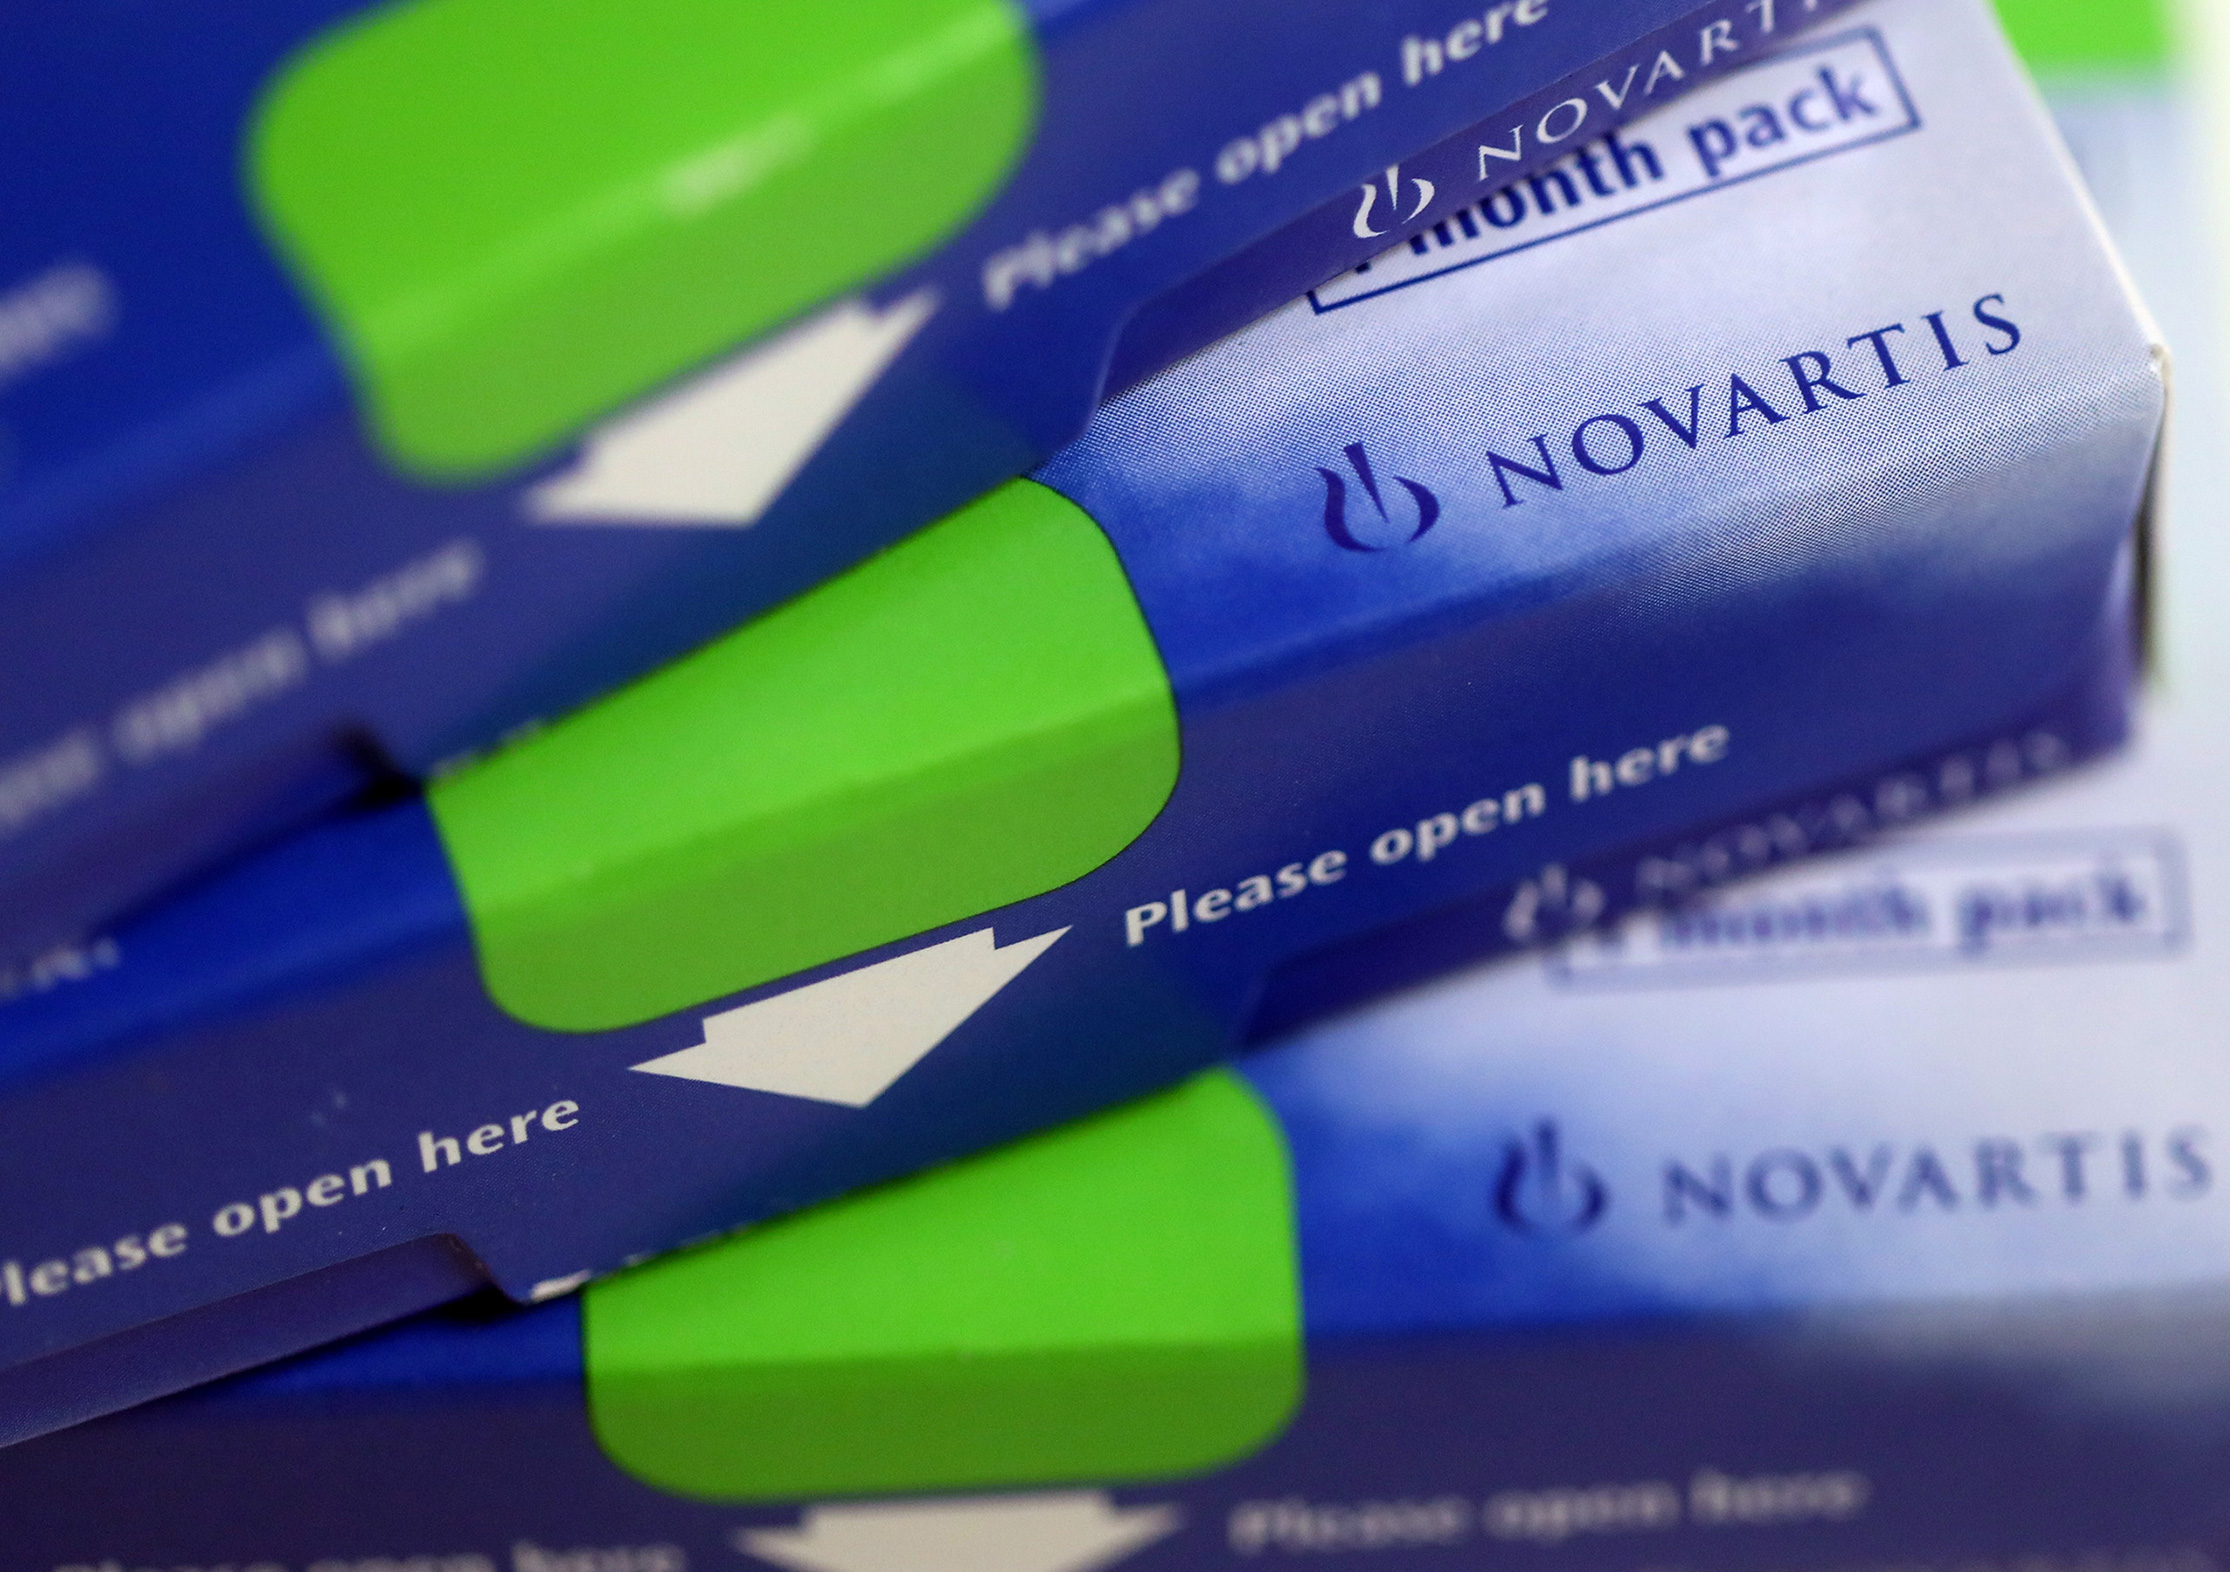 Boxes of tablets, produced by Novartis AG, sit on a pharmacy counter in this arranged photograph in London, U.K., on Thursday, Dec. 29, 2016.
